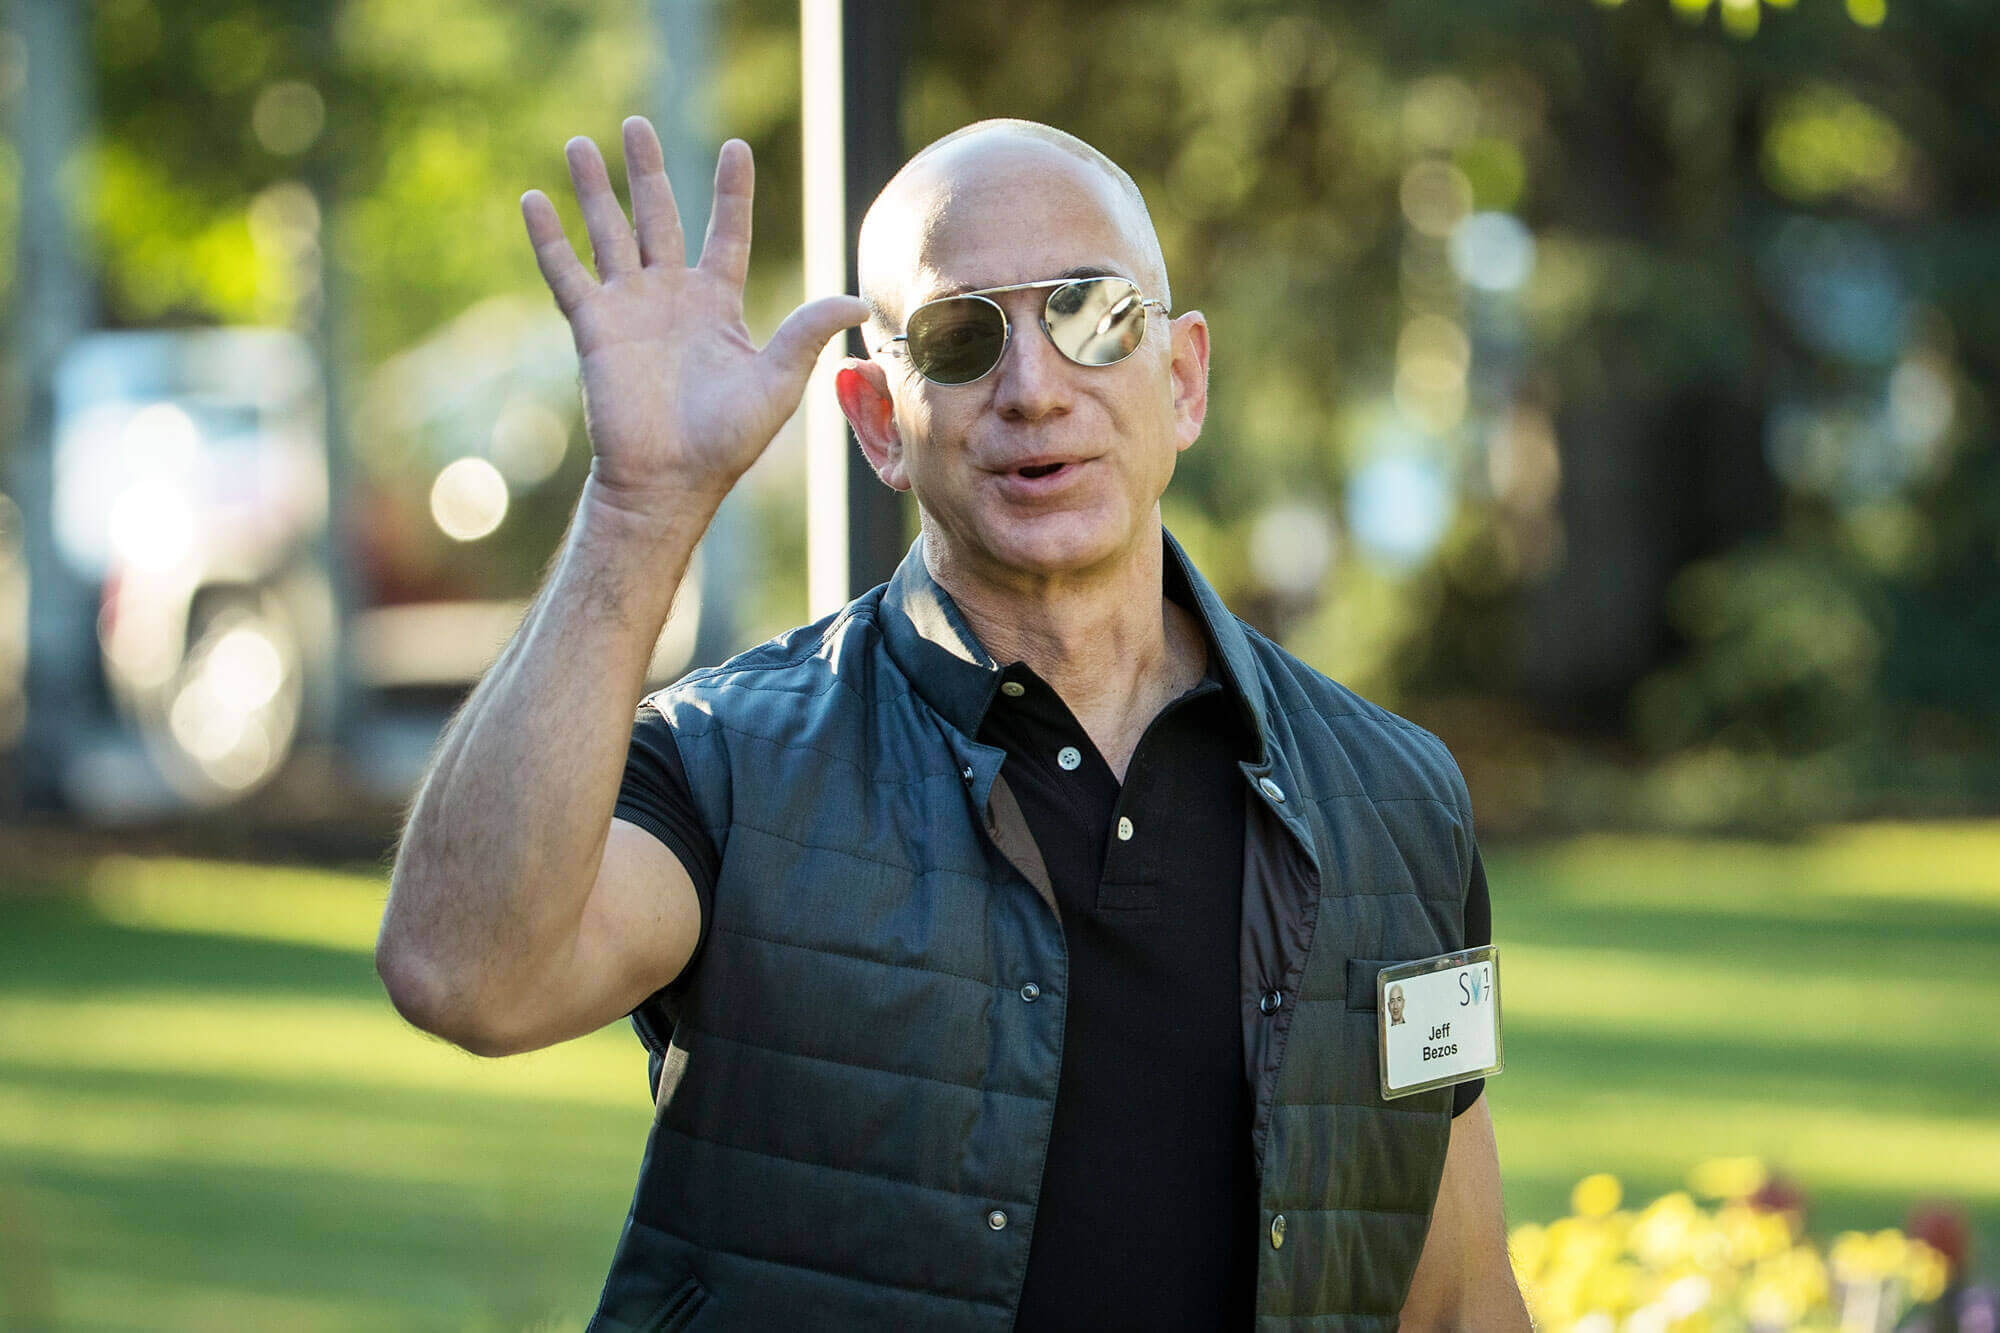 Amazon CEO Jeff Bezos is the world's wealthiest person for the third year in a row